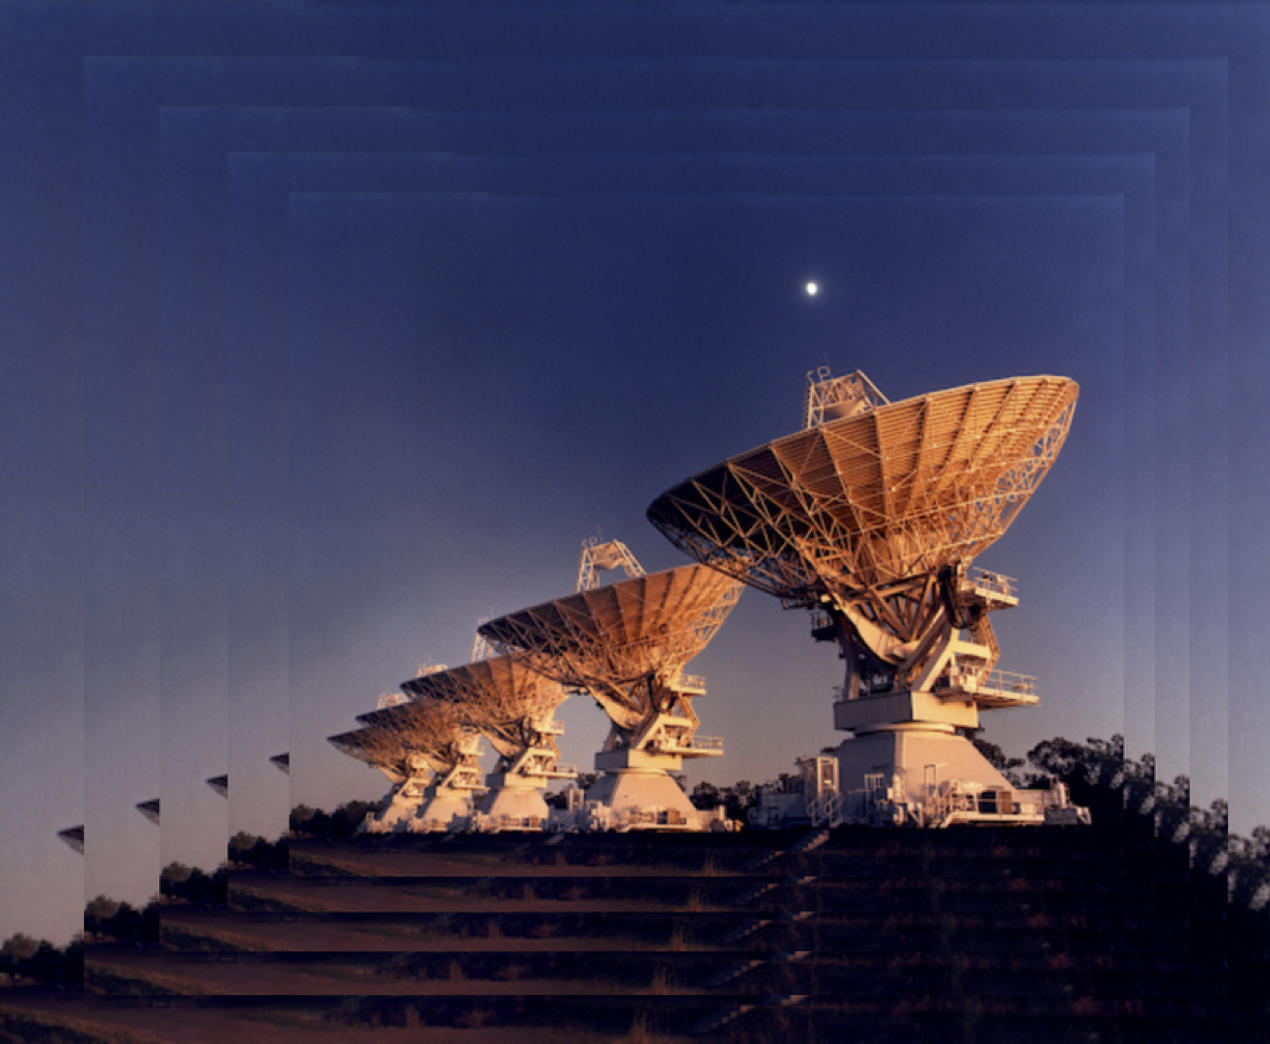 Search for the aliens with radio telescope